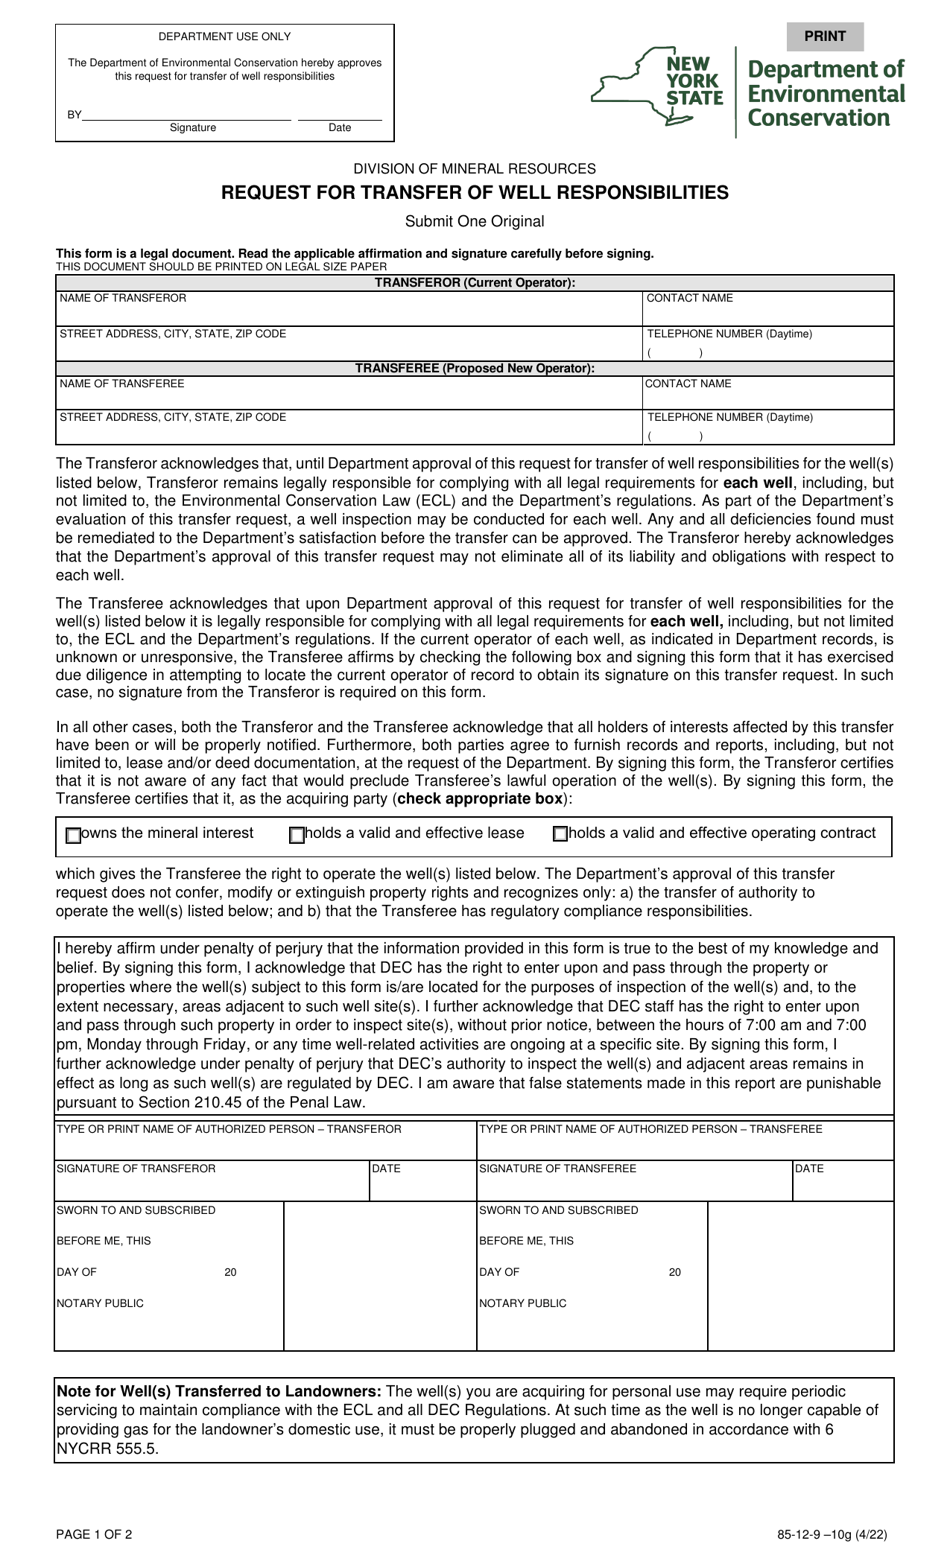 Form 85-12-9-10G Request for Transfer of Well Responsibilities - New York, Page 1